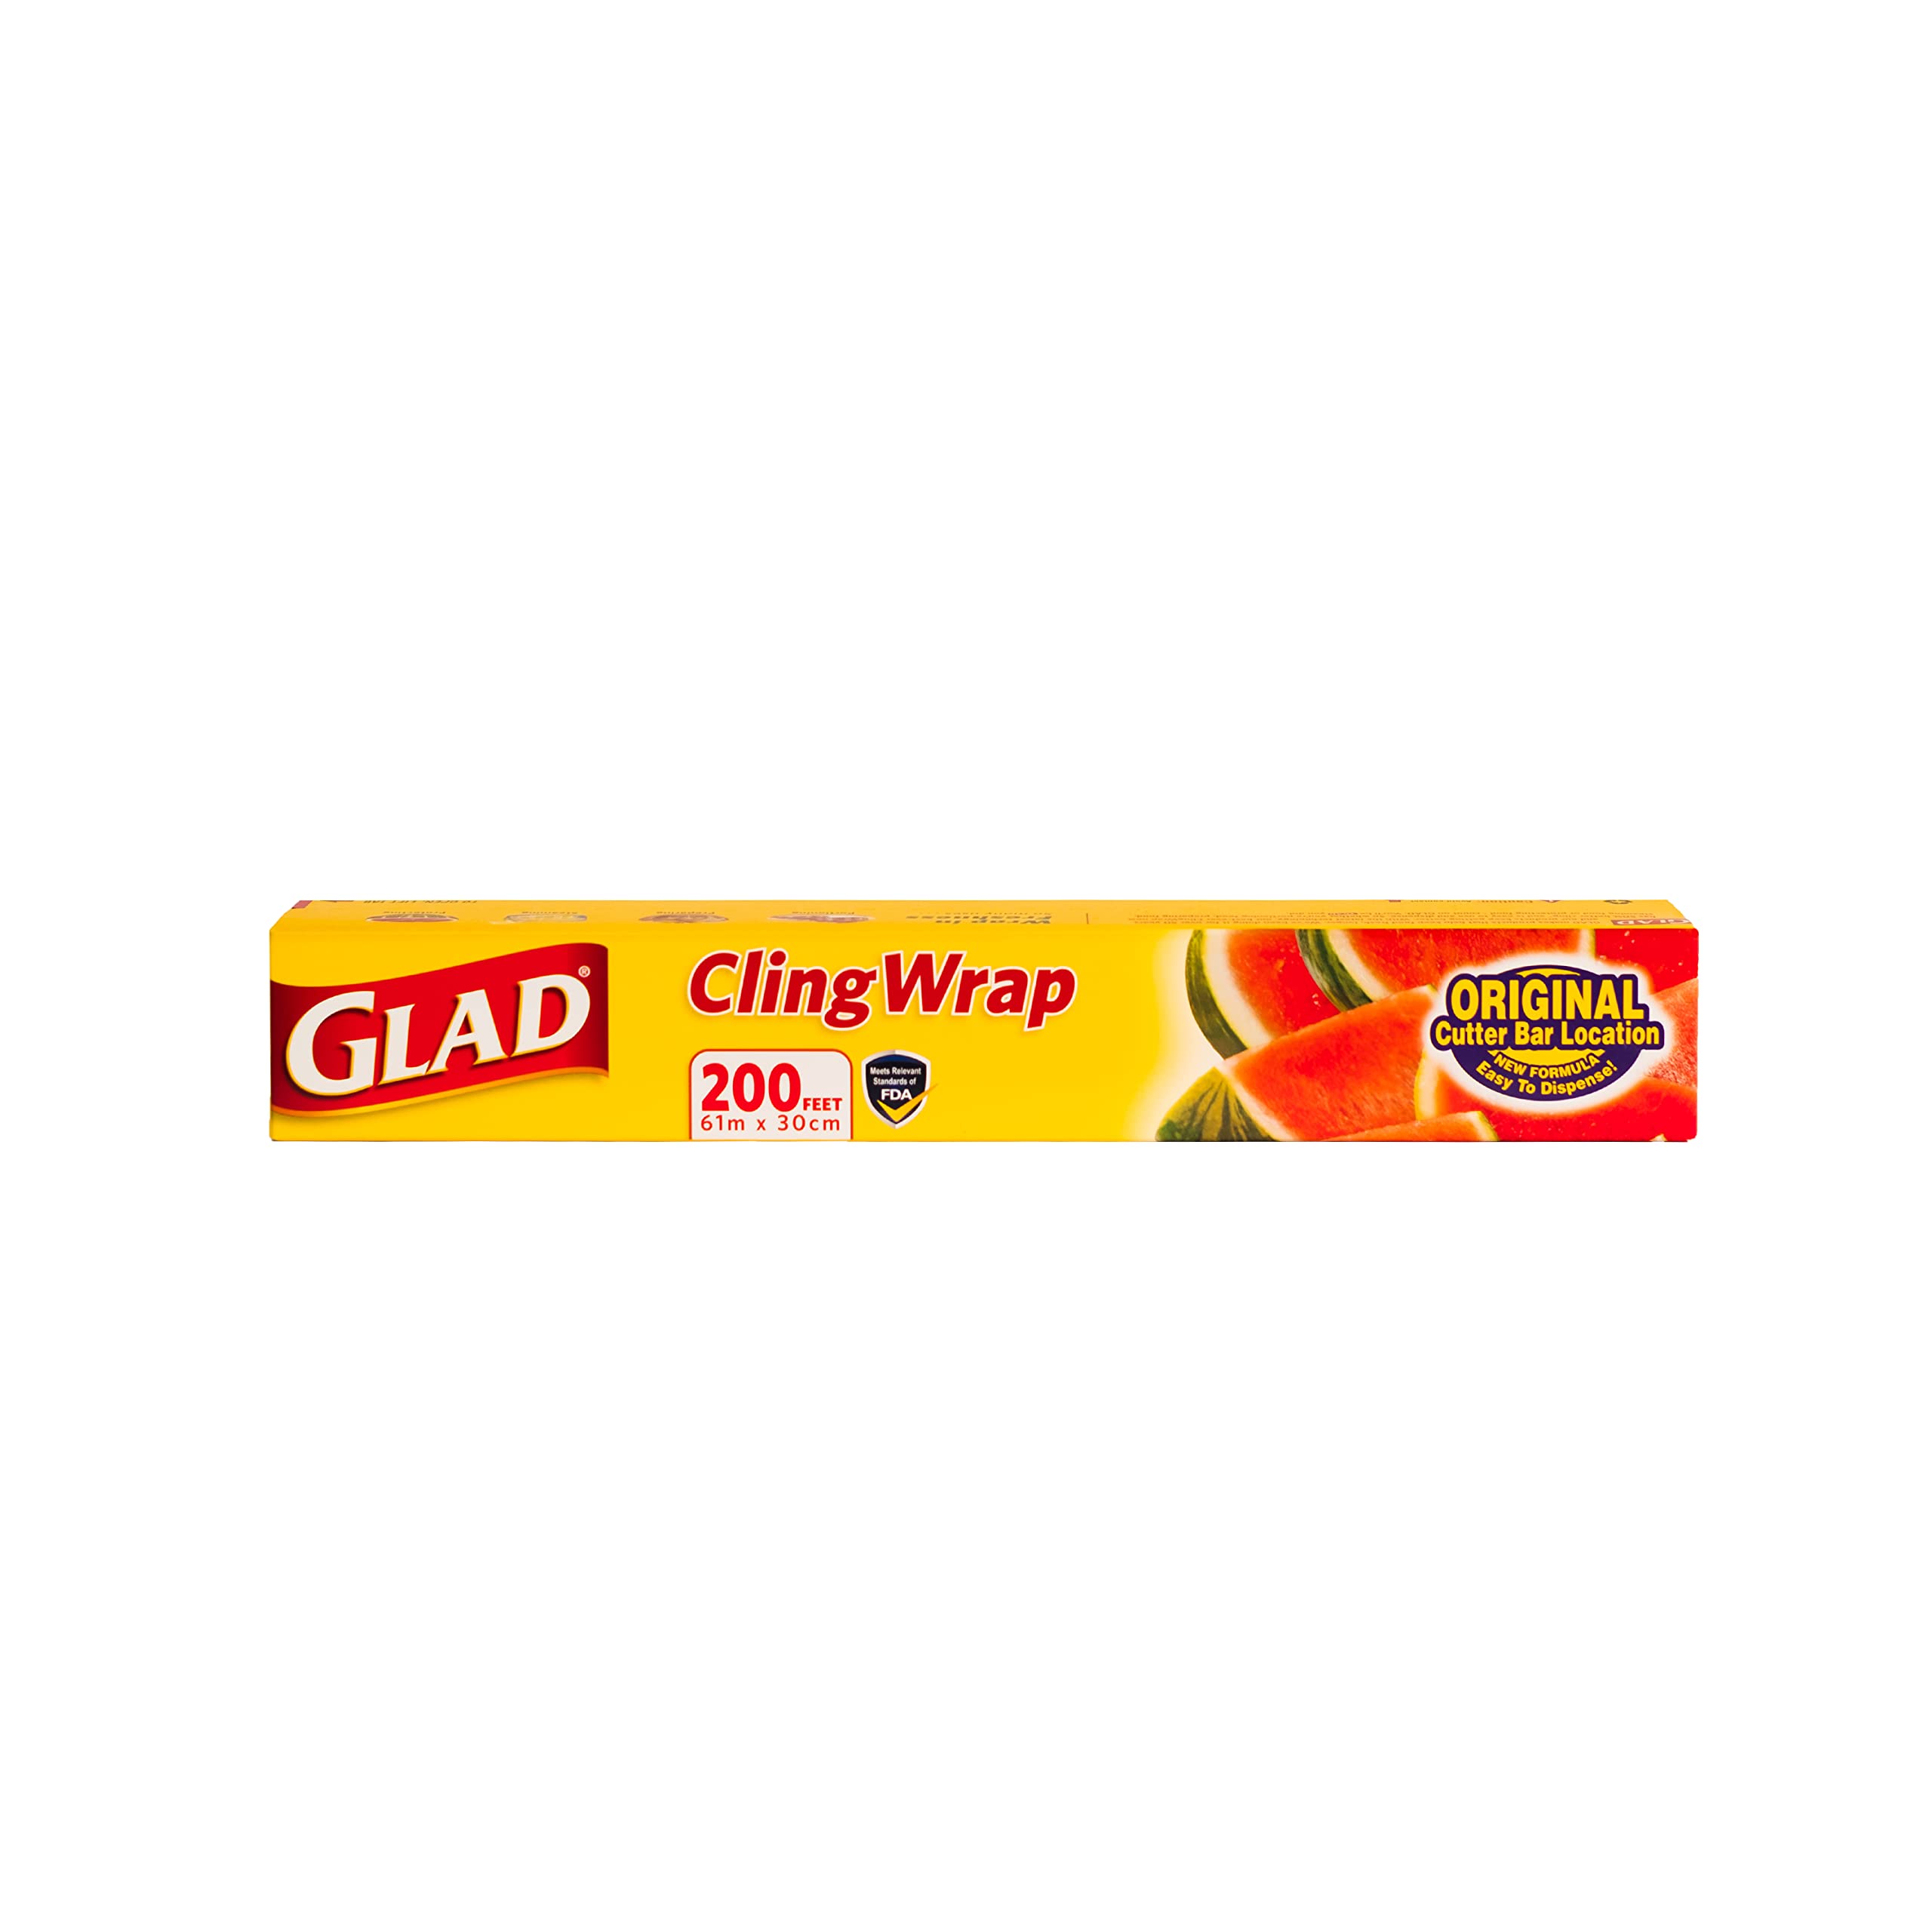 Glad® Caterer's Cling Wrap - RapidClean